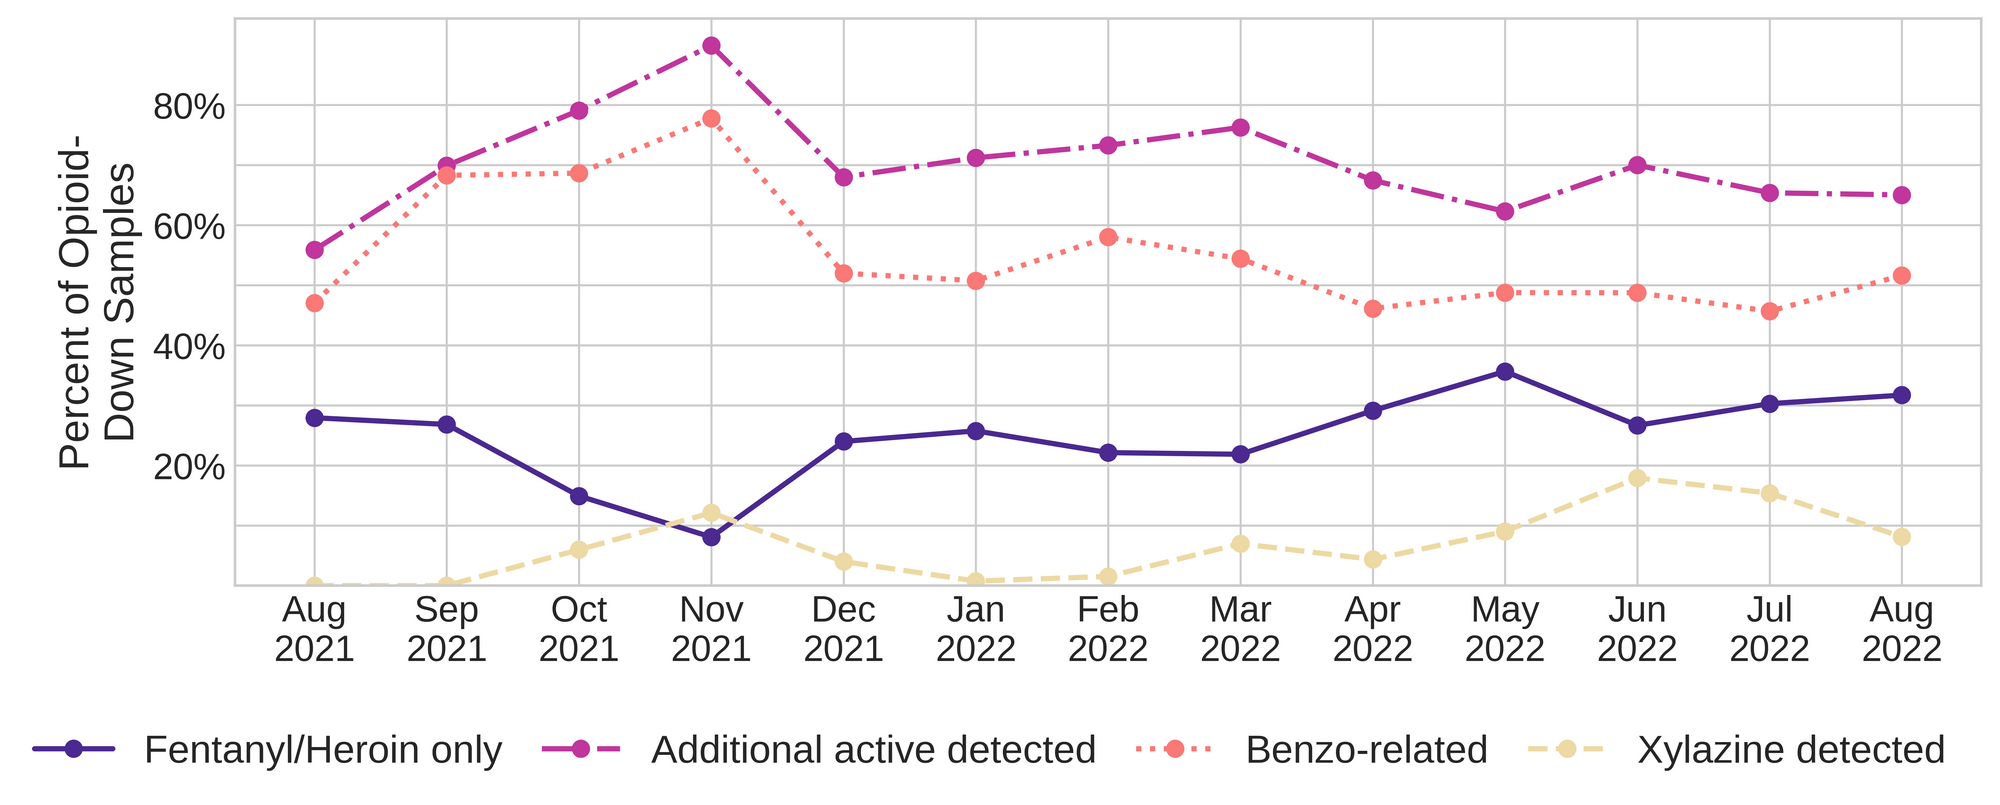 Figure 1. The percentage of expected opioid-down samples checked between August 2021 and August 2022 that only contained fentanyl/heroin actives (dark purple), opioid-down samples with an additional active detected (magenta), opioid-down samples that contained a benzodiazepine-related drug (salmon), and opioid-down samples that contained xylazine (yellow).